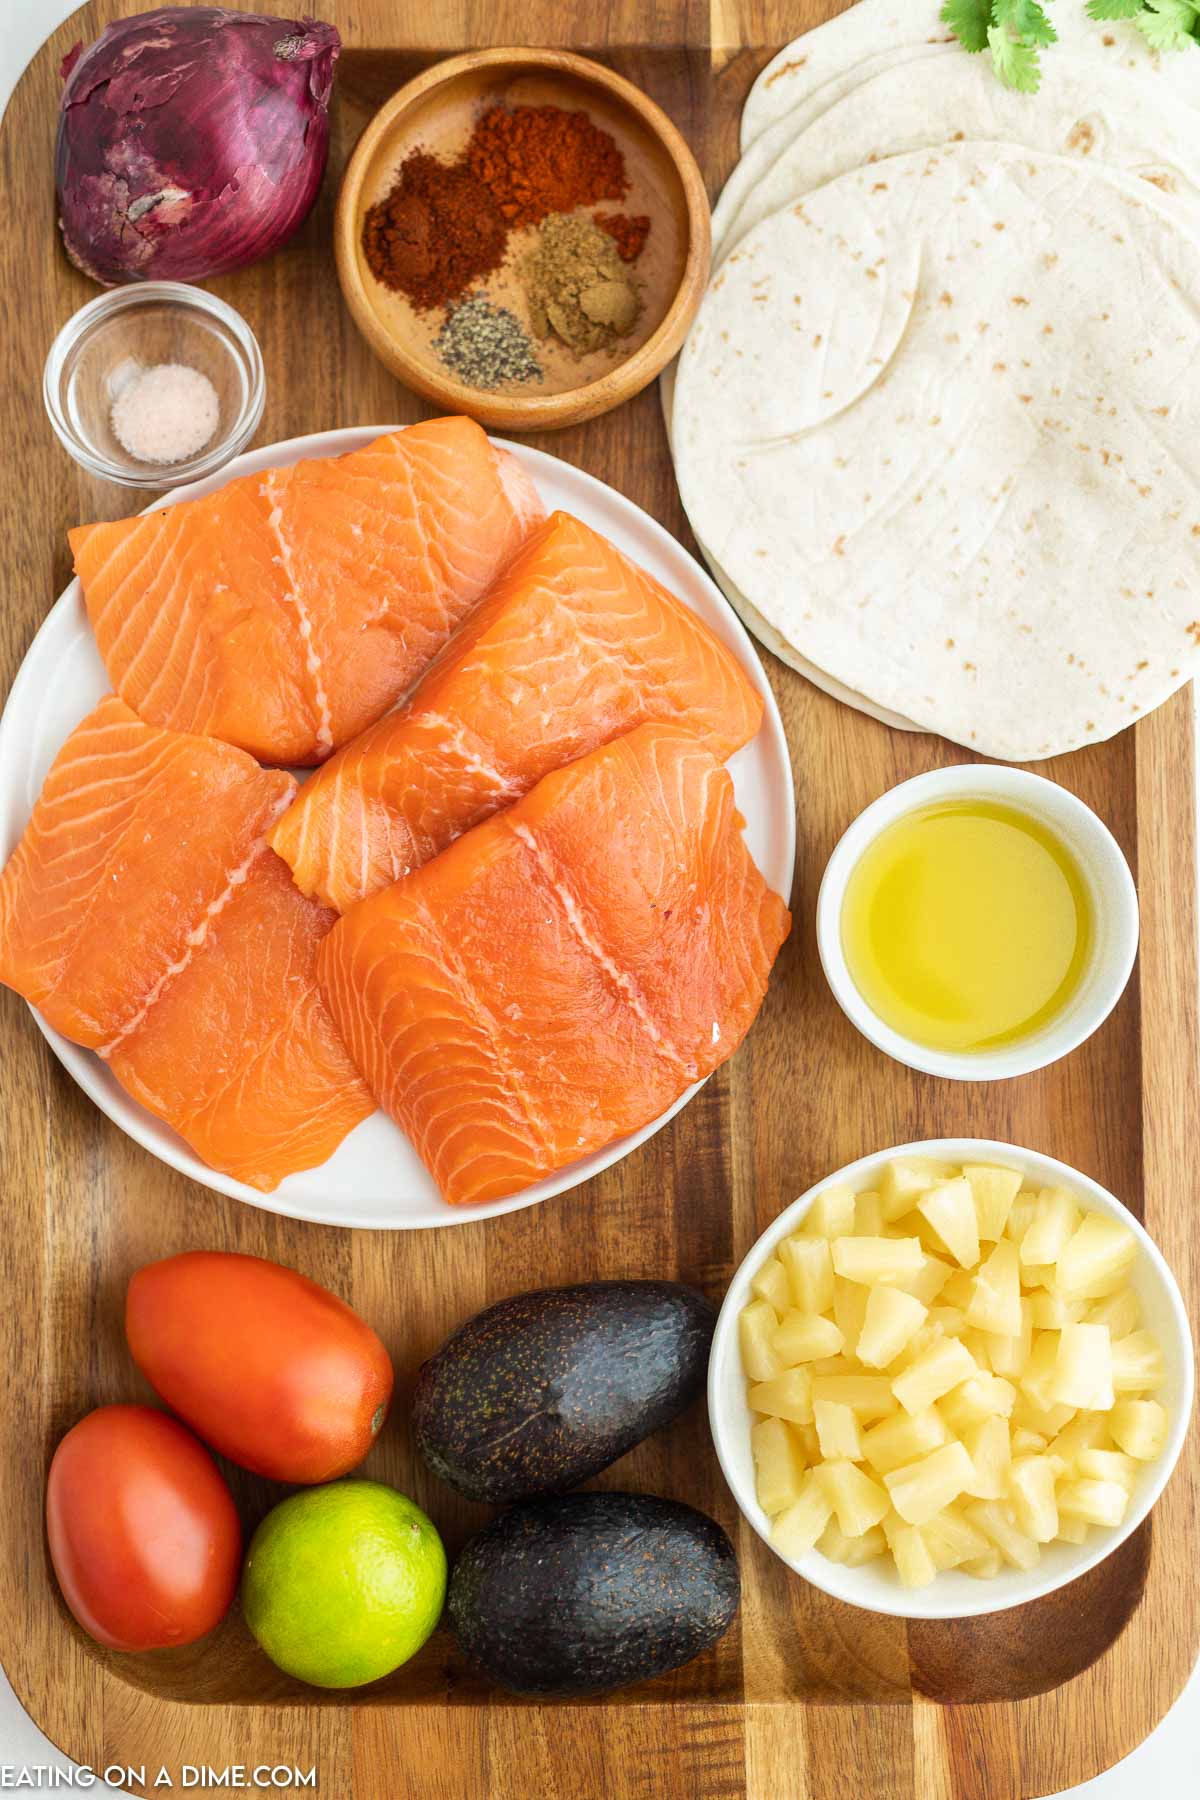 Ingredients for Grilled salmon tacos - Salmon Filets, olive oil, chile powder, paprika, cumin, salt, pepper, lime, pineapple tidbits, tomatoes, onion, avocados, cilantro, tortillas, red cabbage, cotija cheese